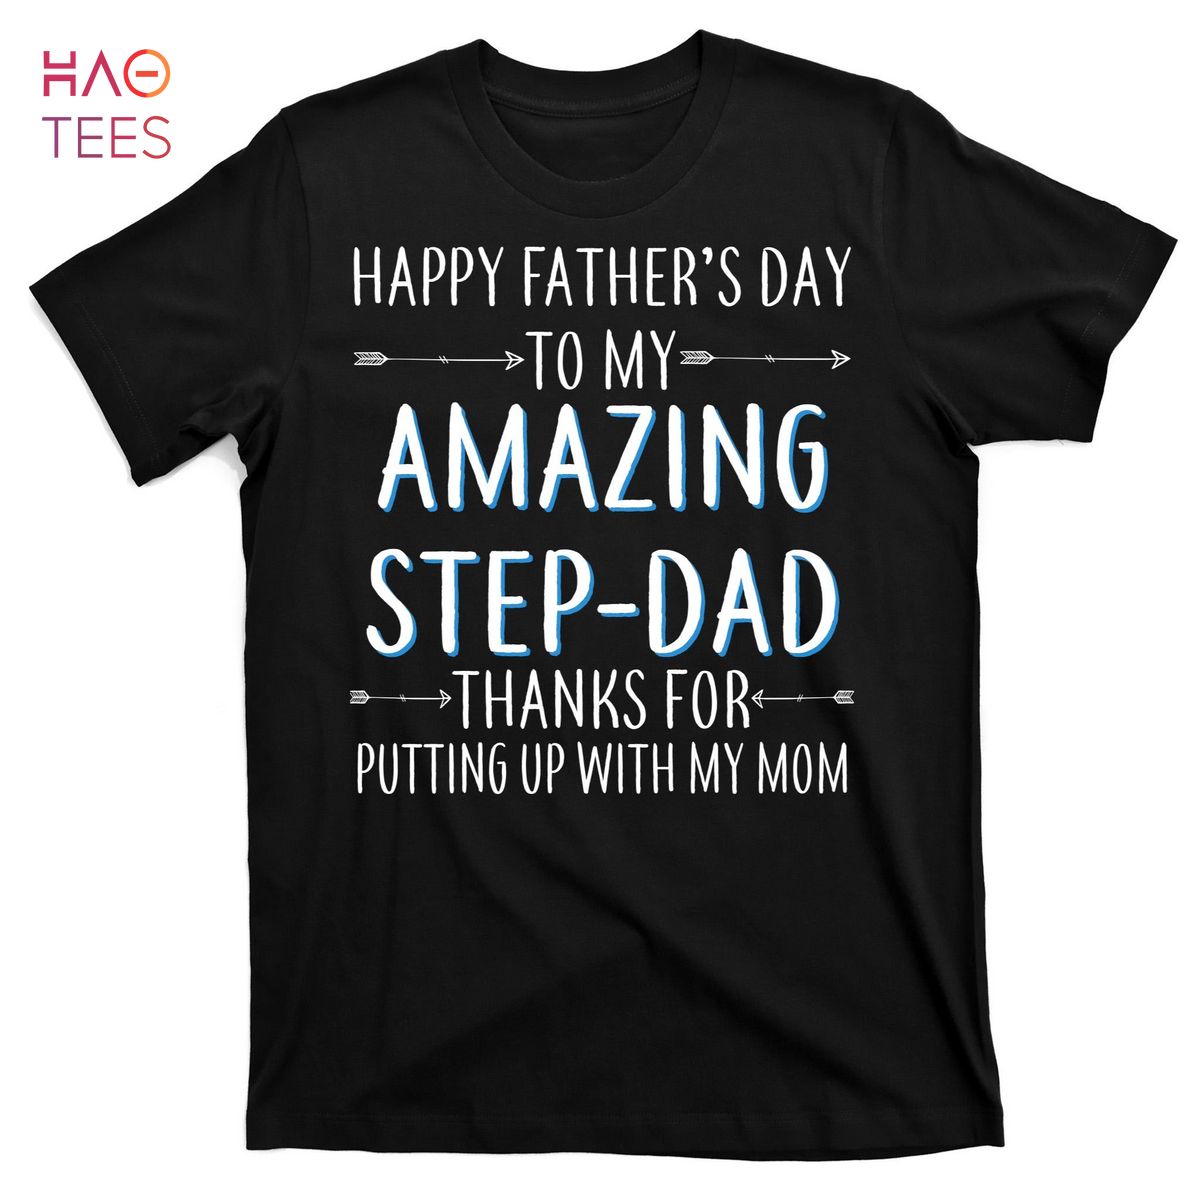 HOT Happy Father's Day To My Amazing Step-Dad T-Shirts